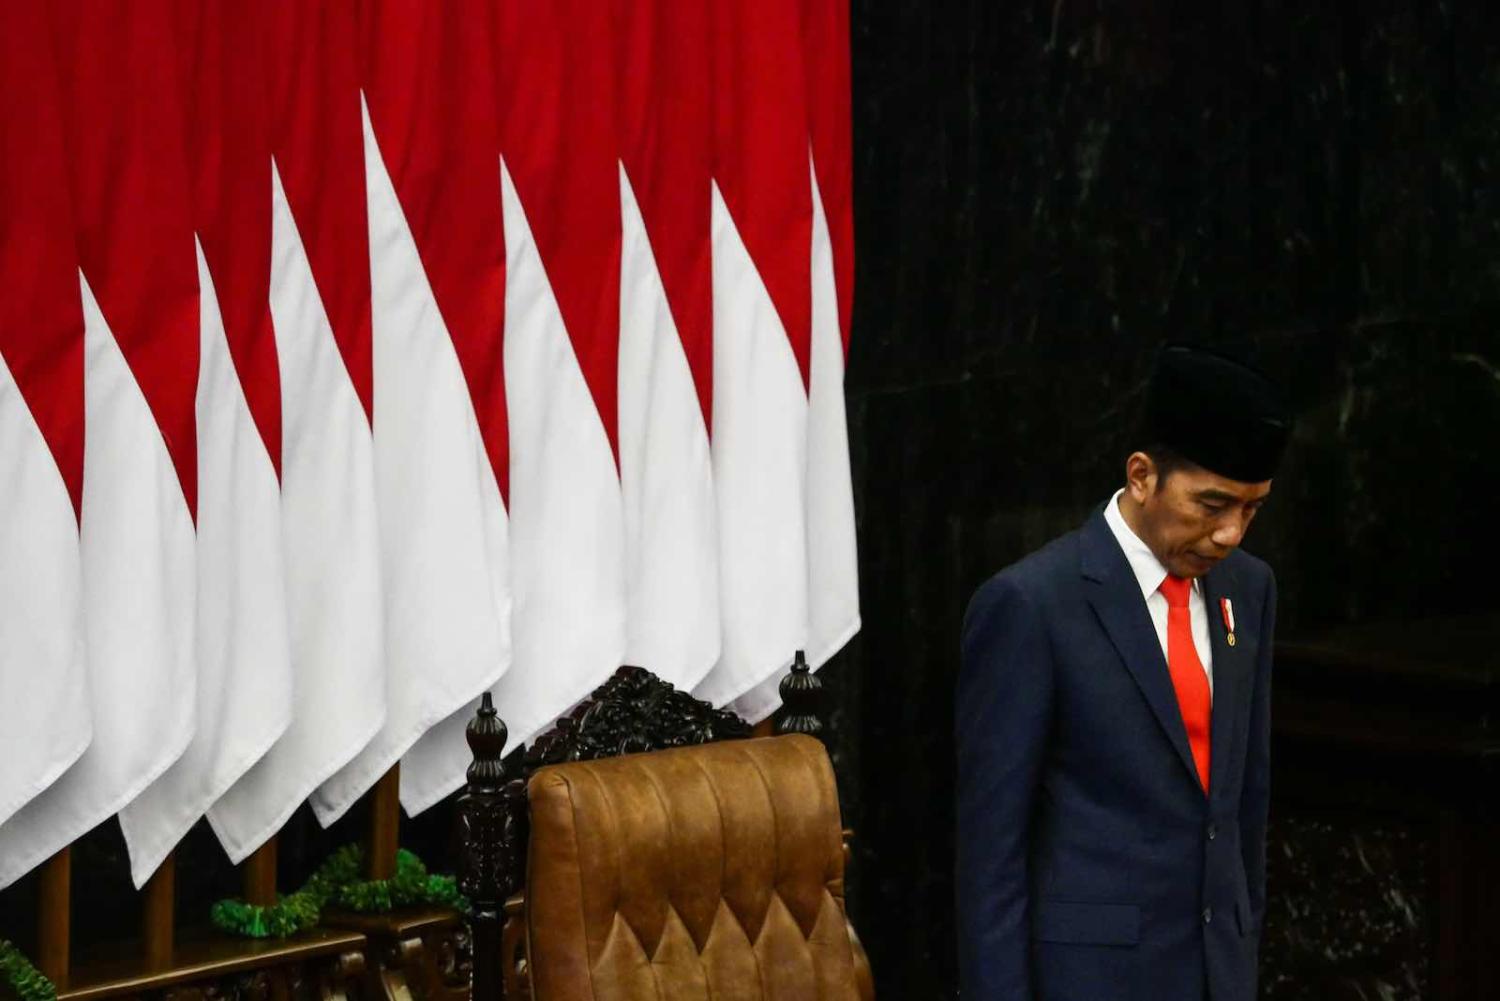 Once dubbed “a new hope” for democracy, Joko Widodo has instead presided over a period of democratic stagnation and regression, according to many (Anton Raharjo/NurPhoto via Getty Images)